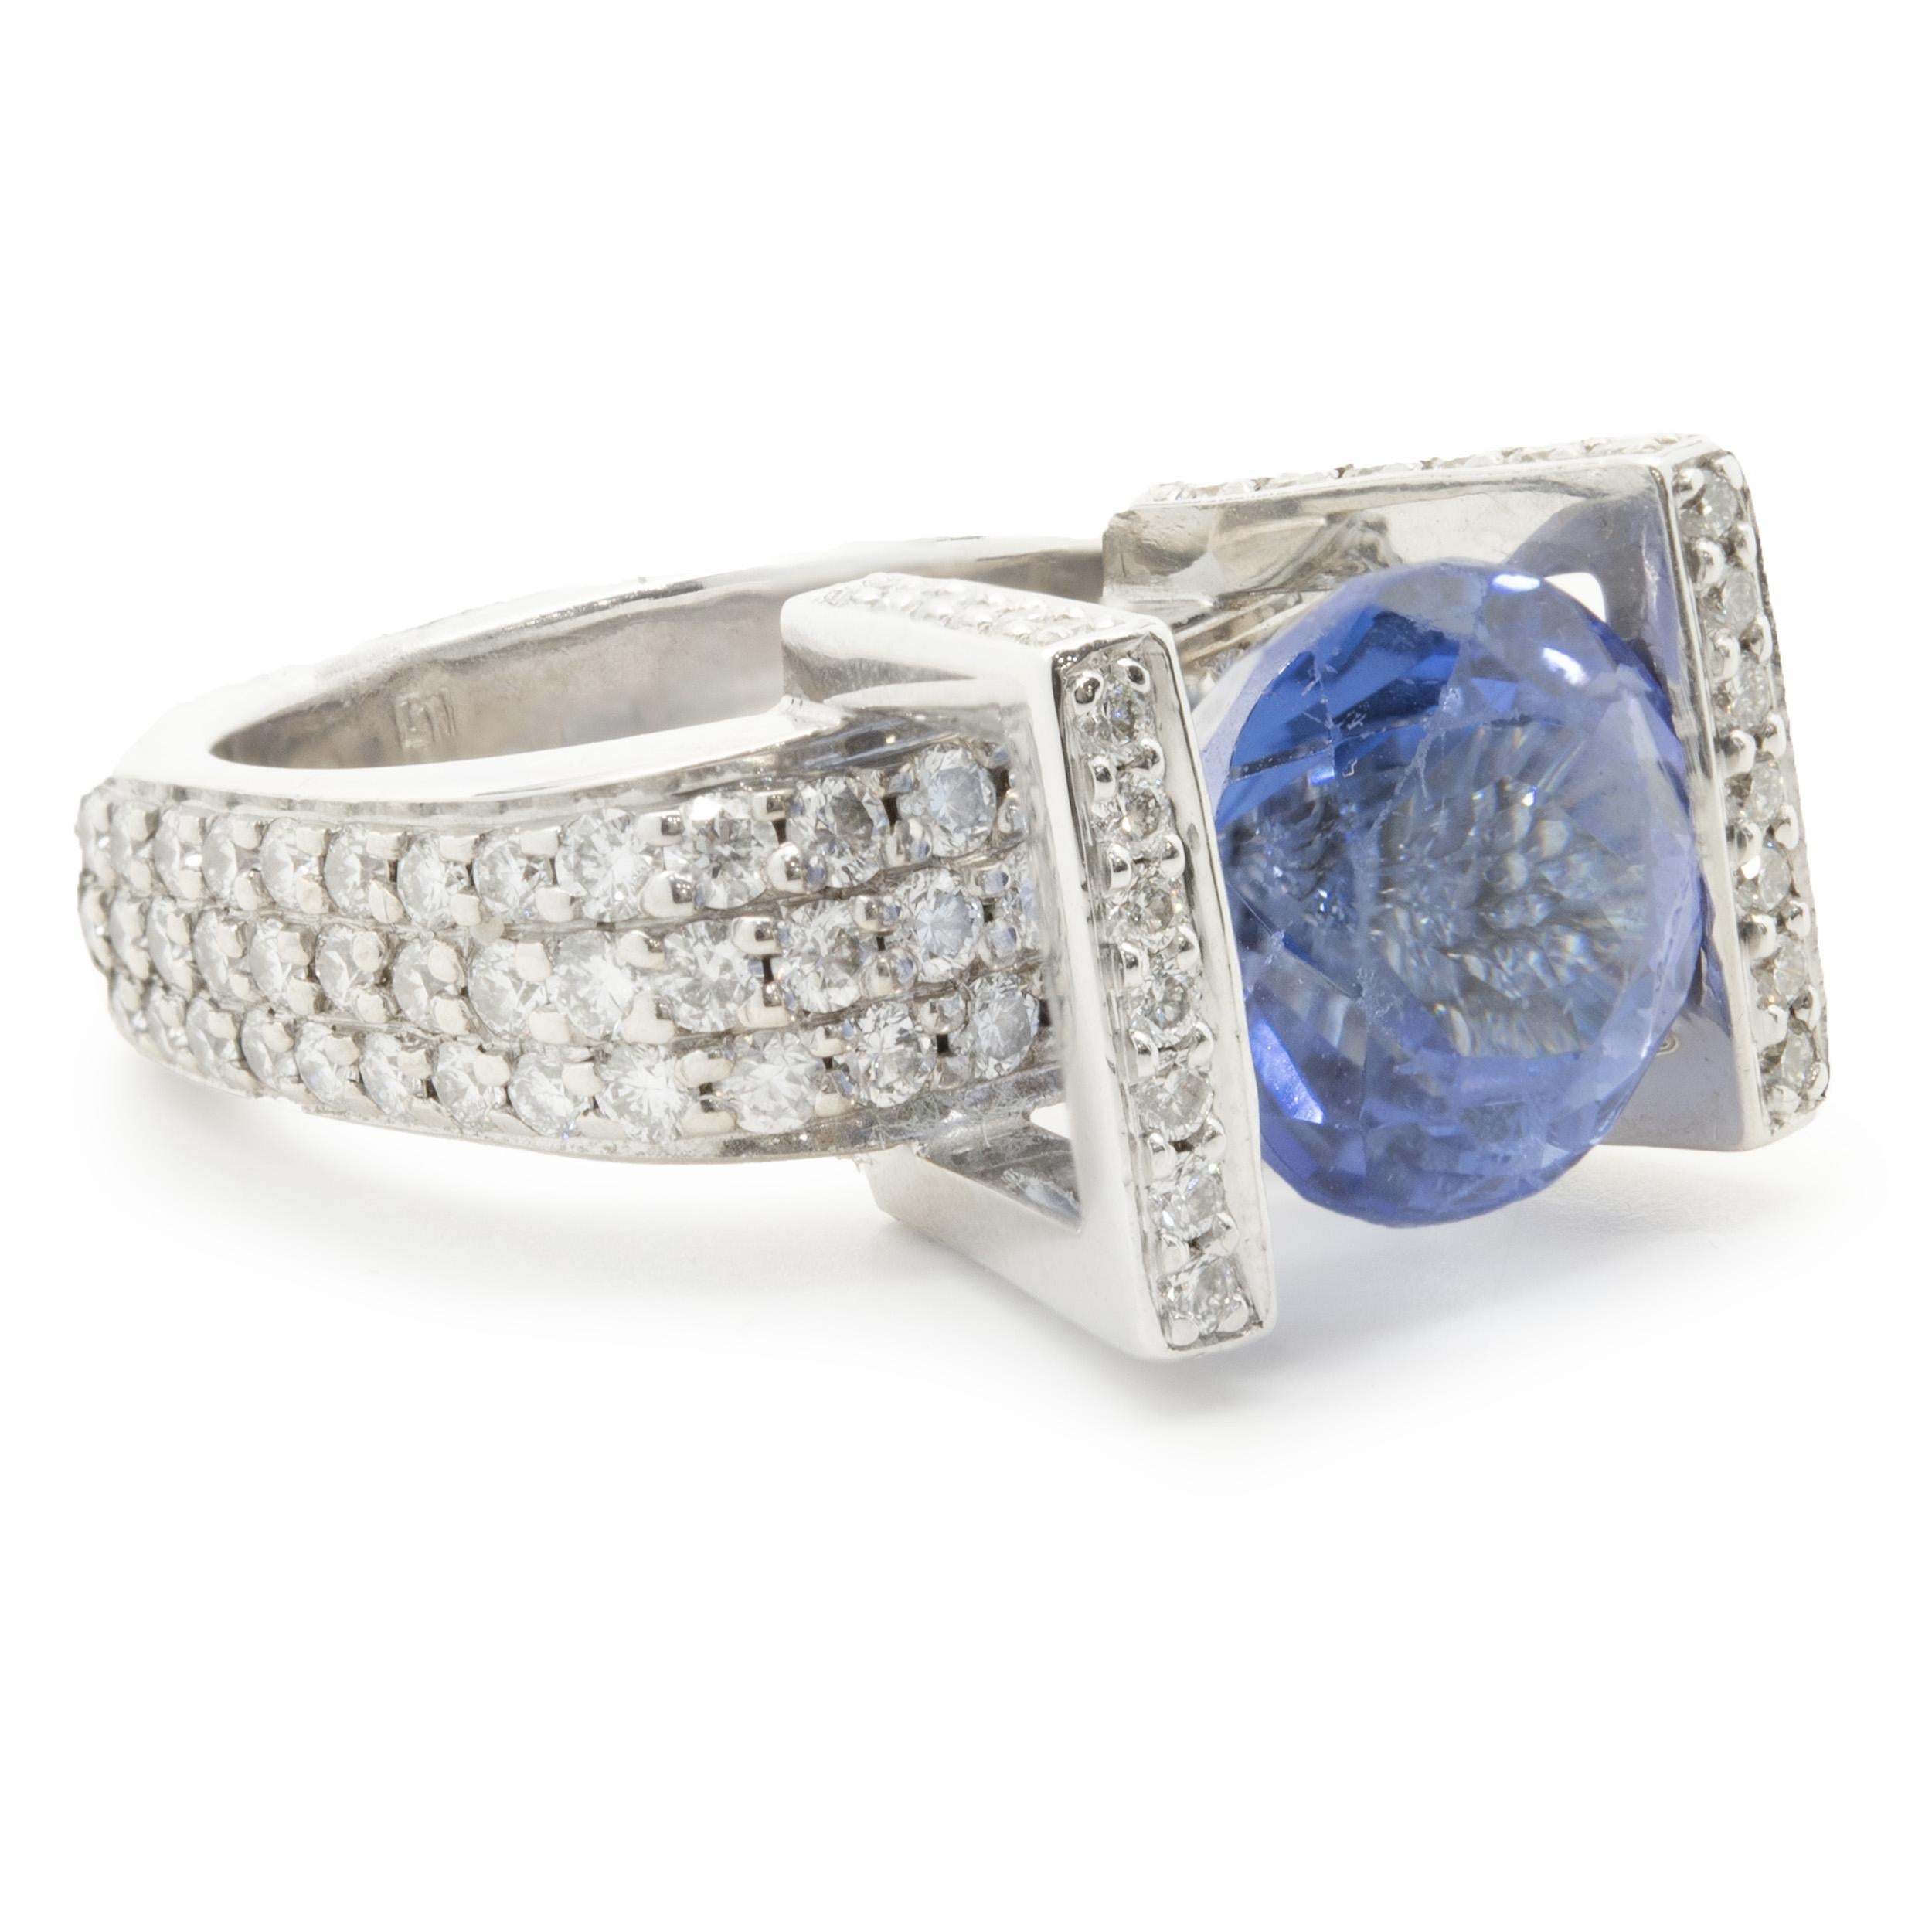 Gauthier 14 Karat White Gold Tanzanite and Diamond Structure Ring In Excellent Condition For Sale In Scottsdale, AZ